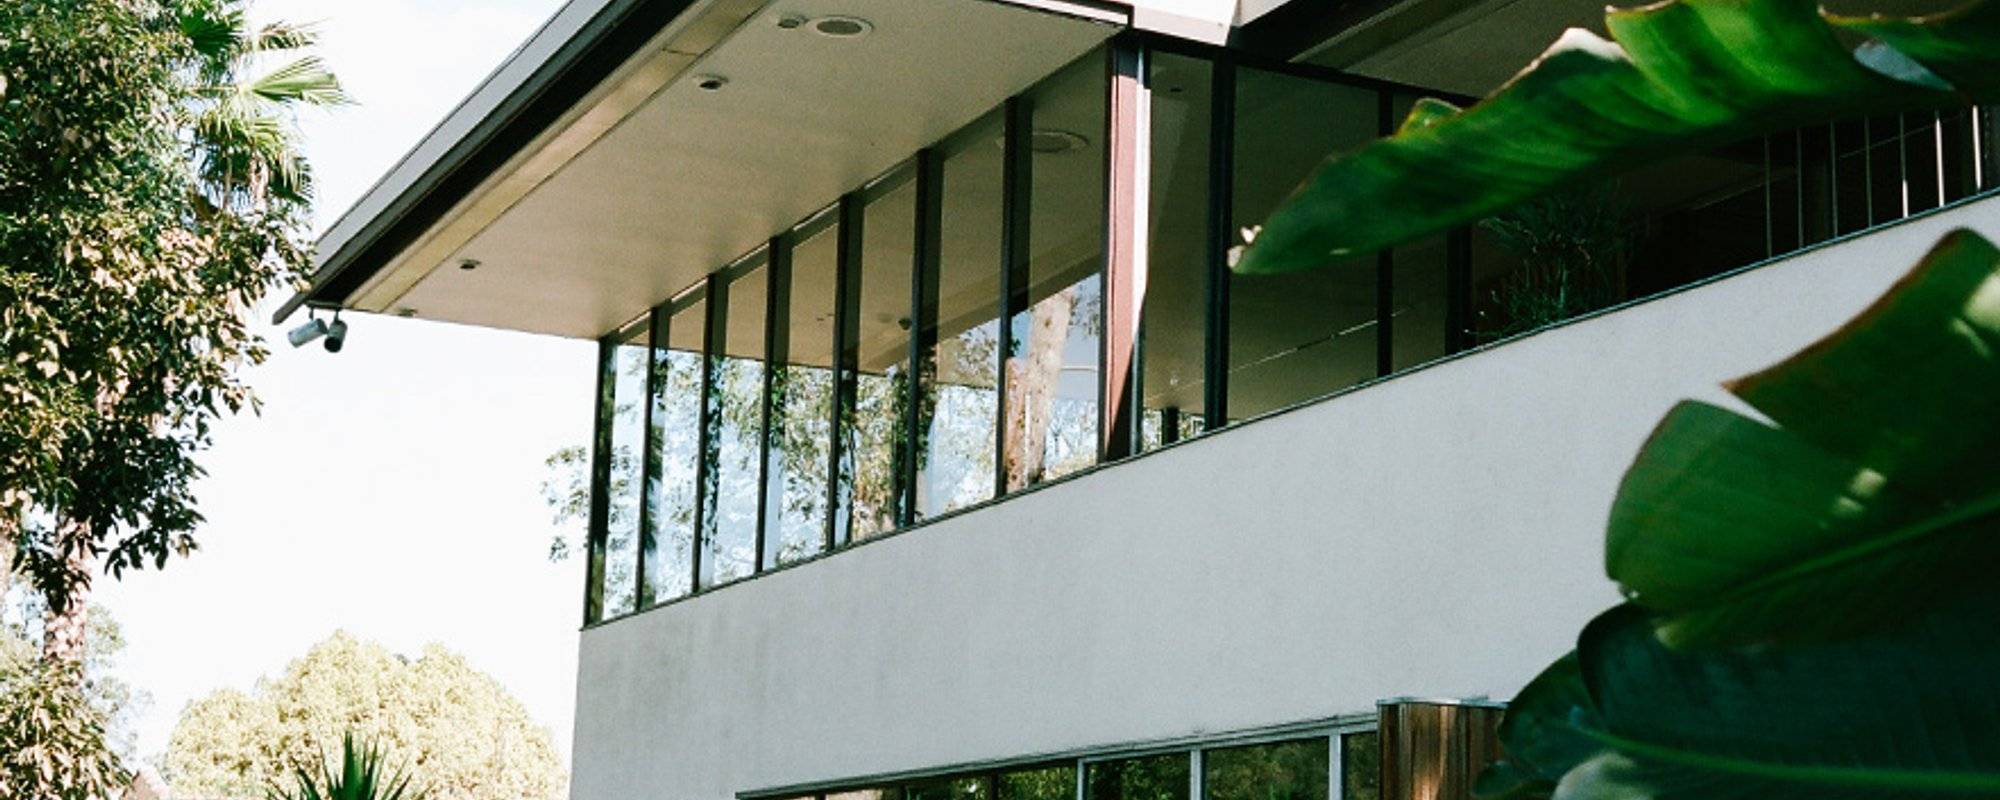 Exploring Los Angeles - A Visit to the Neutra VDL Research House